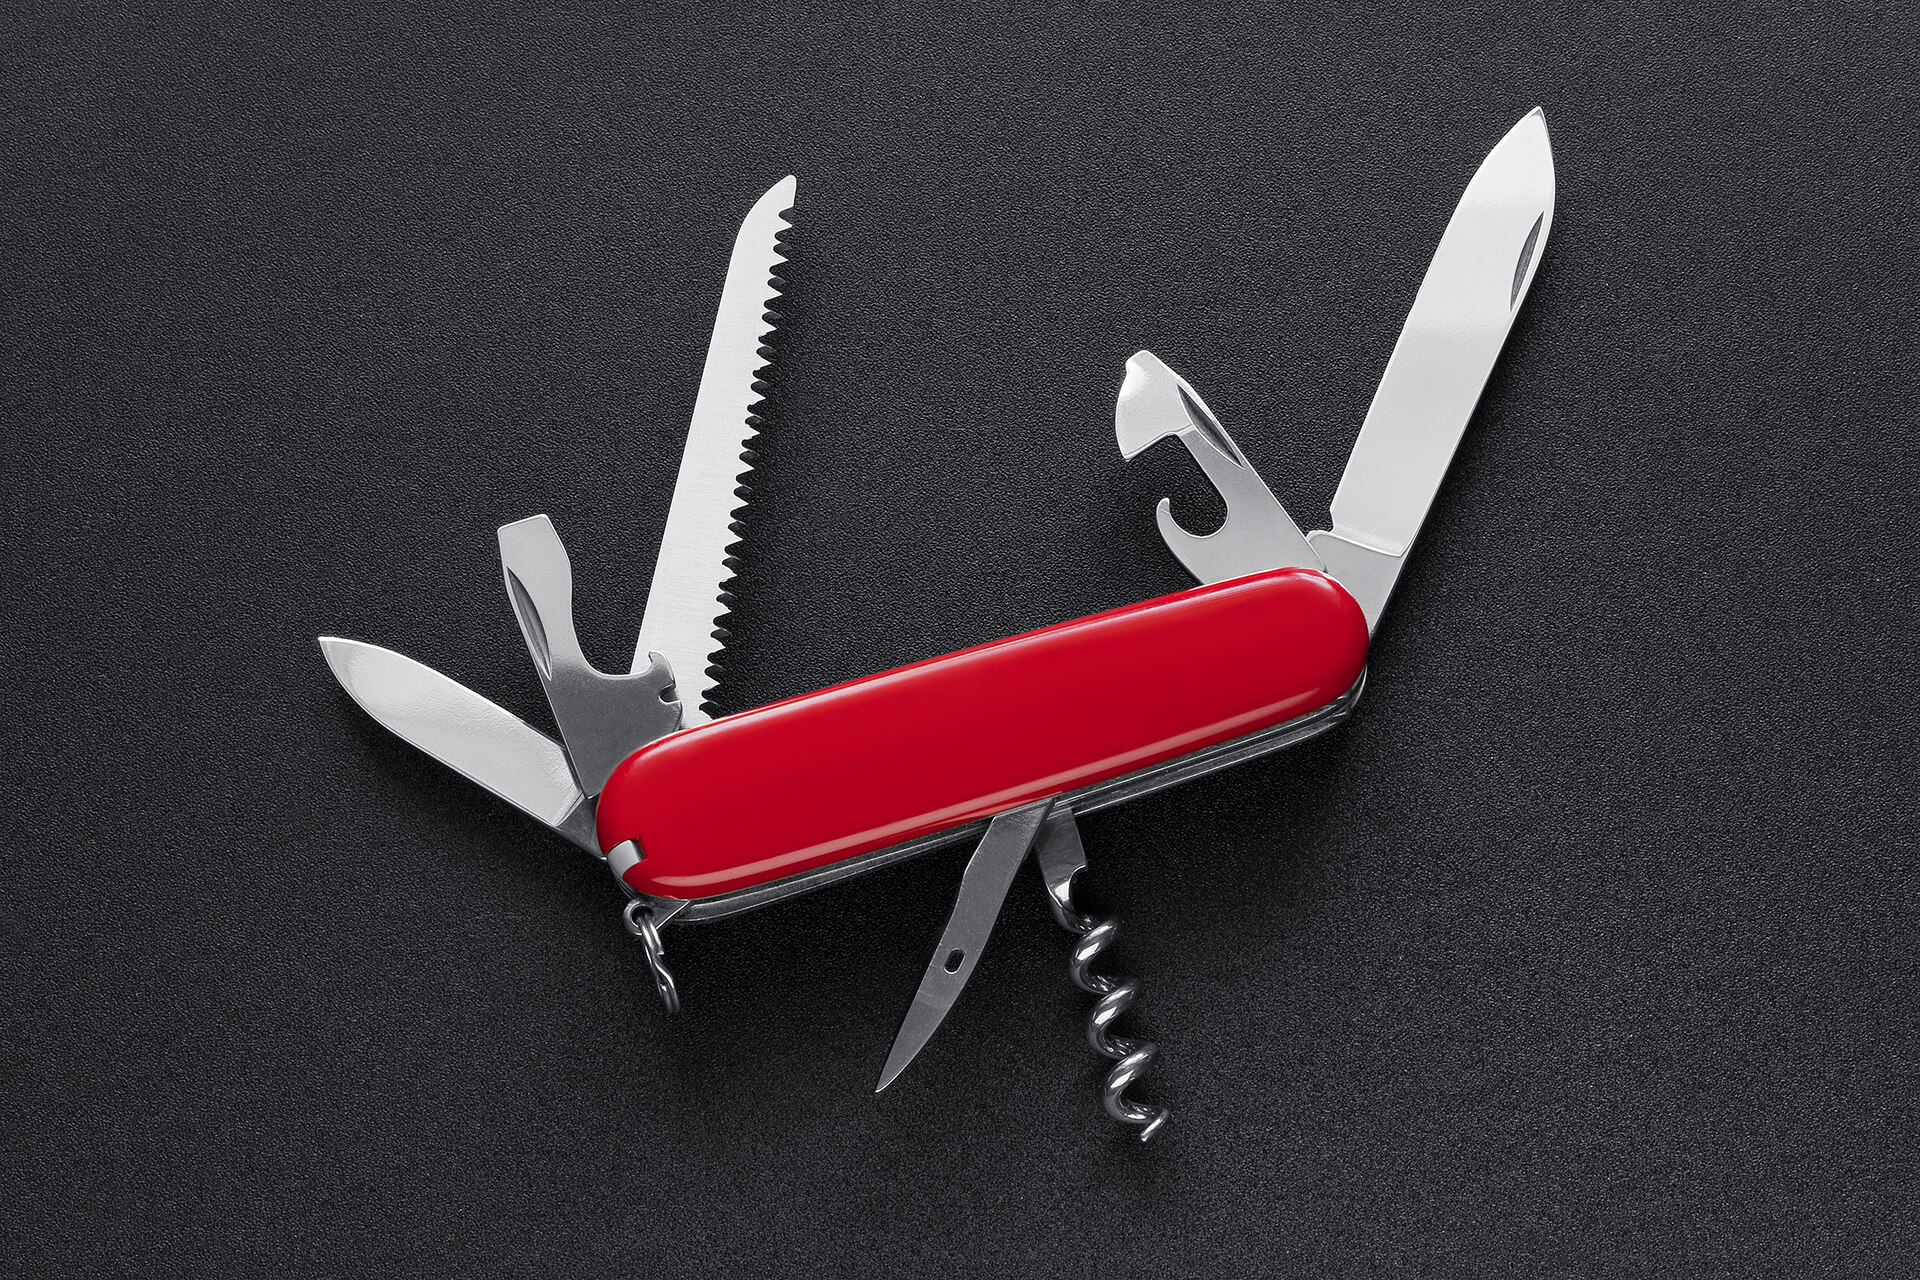 Sale > something on a swiss army knife > in stock